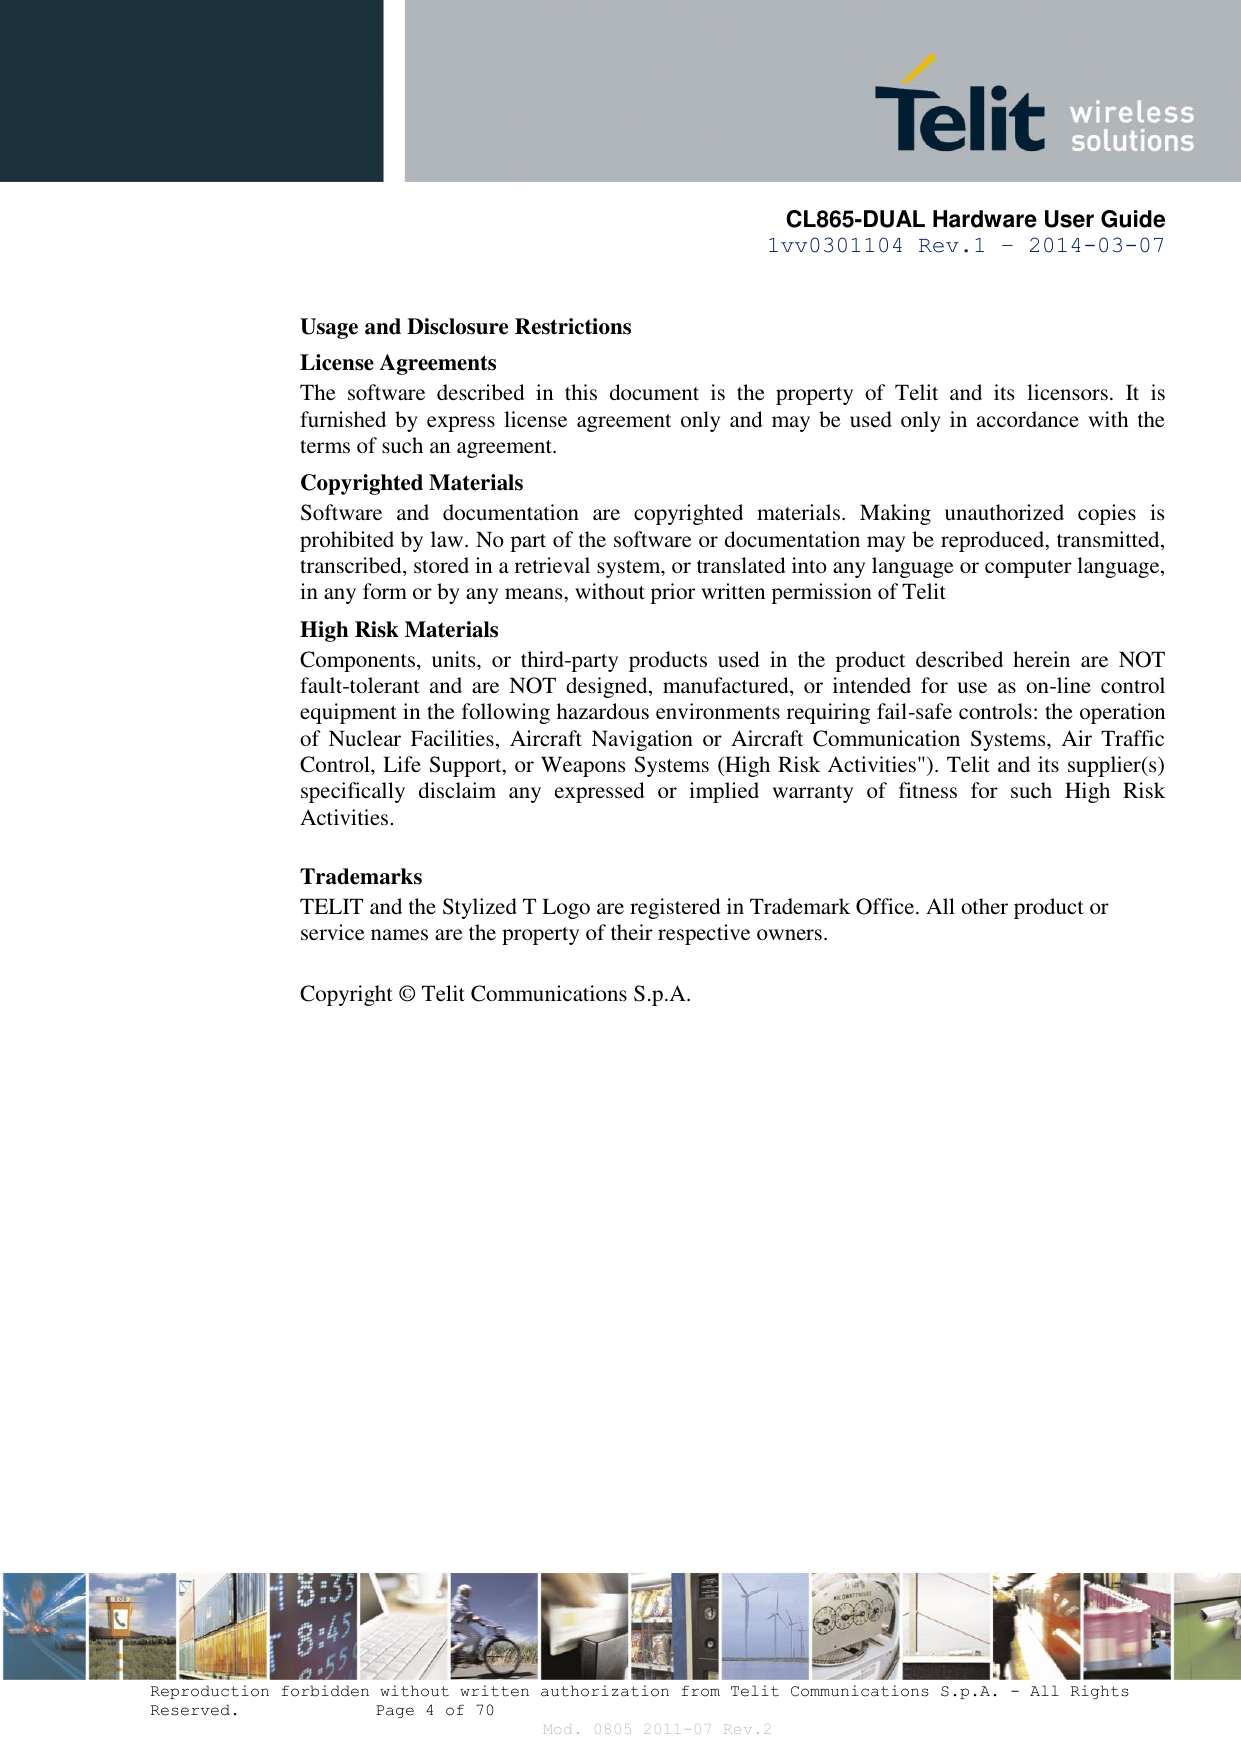       CL865-DUAL Hardware User Guide 1vv0301104 Rev.1 – 2014-03-07  Reproduction forbidden without written authorization from Telit Communications S.p.A. - All Rights Reserved.    Page 4 of 70 Mod. 0805 2011-07 Rev.2 Usage and Disclosure Restrictions License Agreements The  software  described  in  this  document  is  the  property  of  Telit  and  its  licensors.  It  is furnished by express license agreement only and may be used only in accordance with the terms of such an agreement. Copyrighted Materials Software  and  documentation  are  copyrighted  materials.  Making  unauthorized  copies  is prohibited by law. No part of the software or documentation may be reproduced, transmitted, transcribed, stored in a retrieval system, or translated into any language or computer language, in any form or by any means, without prior written permission of Telit High Risk Materials Components,  units,  or  third-party  products  used  in  the  product  described  herein  are  NOT fault-tolerant and  are  NOT  designed, manufactured, or  intended for  use  as  on-line  control equipment in the following hazardous environments requiring fail-safe controls: the operation of  Nuclear  Facilities,  Aircraft Navigation  or  Aircraft  Communication  Systems, Air  Traffic Control, Life Support, or Weapons Systems (High Risk Activities&quot;). Telit and its supplier(s) specifically  disclaim  any  expressed  or  implied  warranty  of  fitness  for  such  High  Risk Activities. Trademarks TELIT and the Stylized T Logo are registered in Trademark Office. All other product or service names are the property of their respective owners.   Copyright ©  Telit Communications S.p.A.  